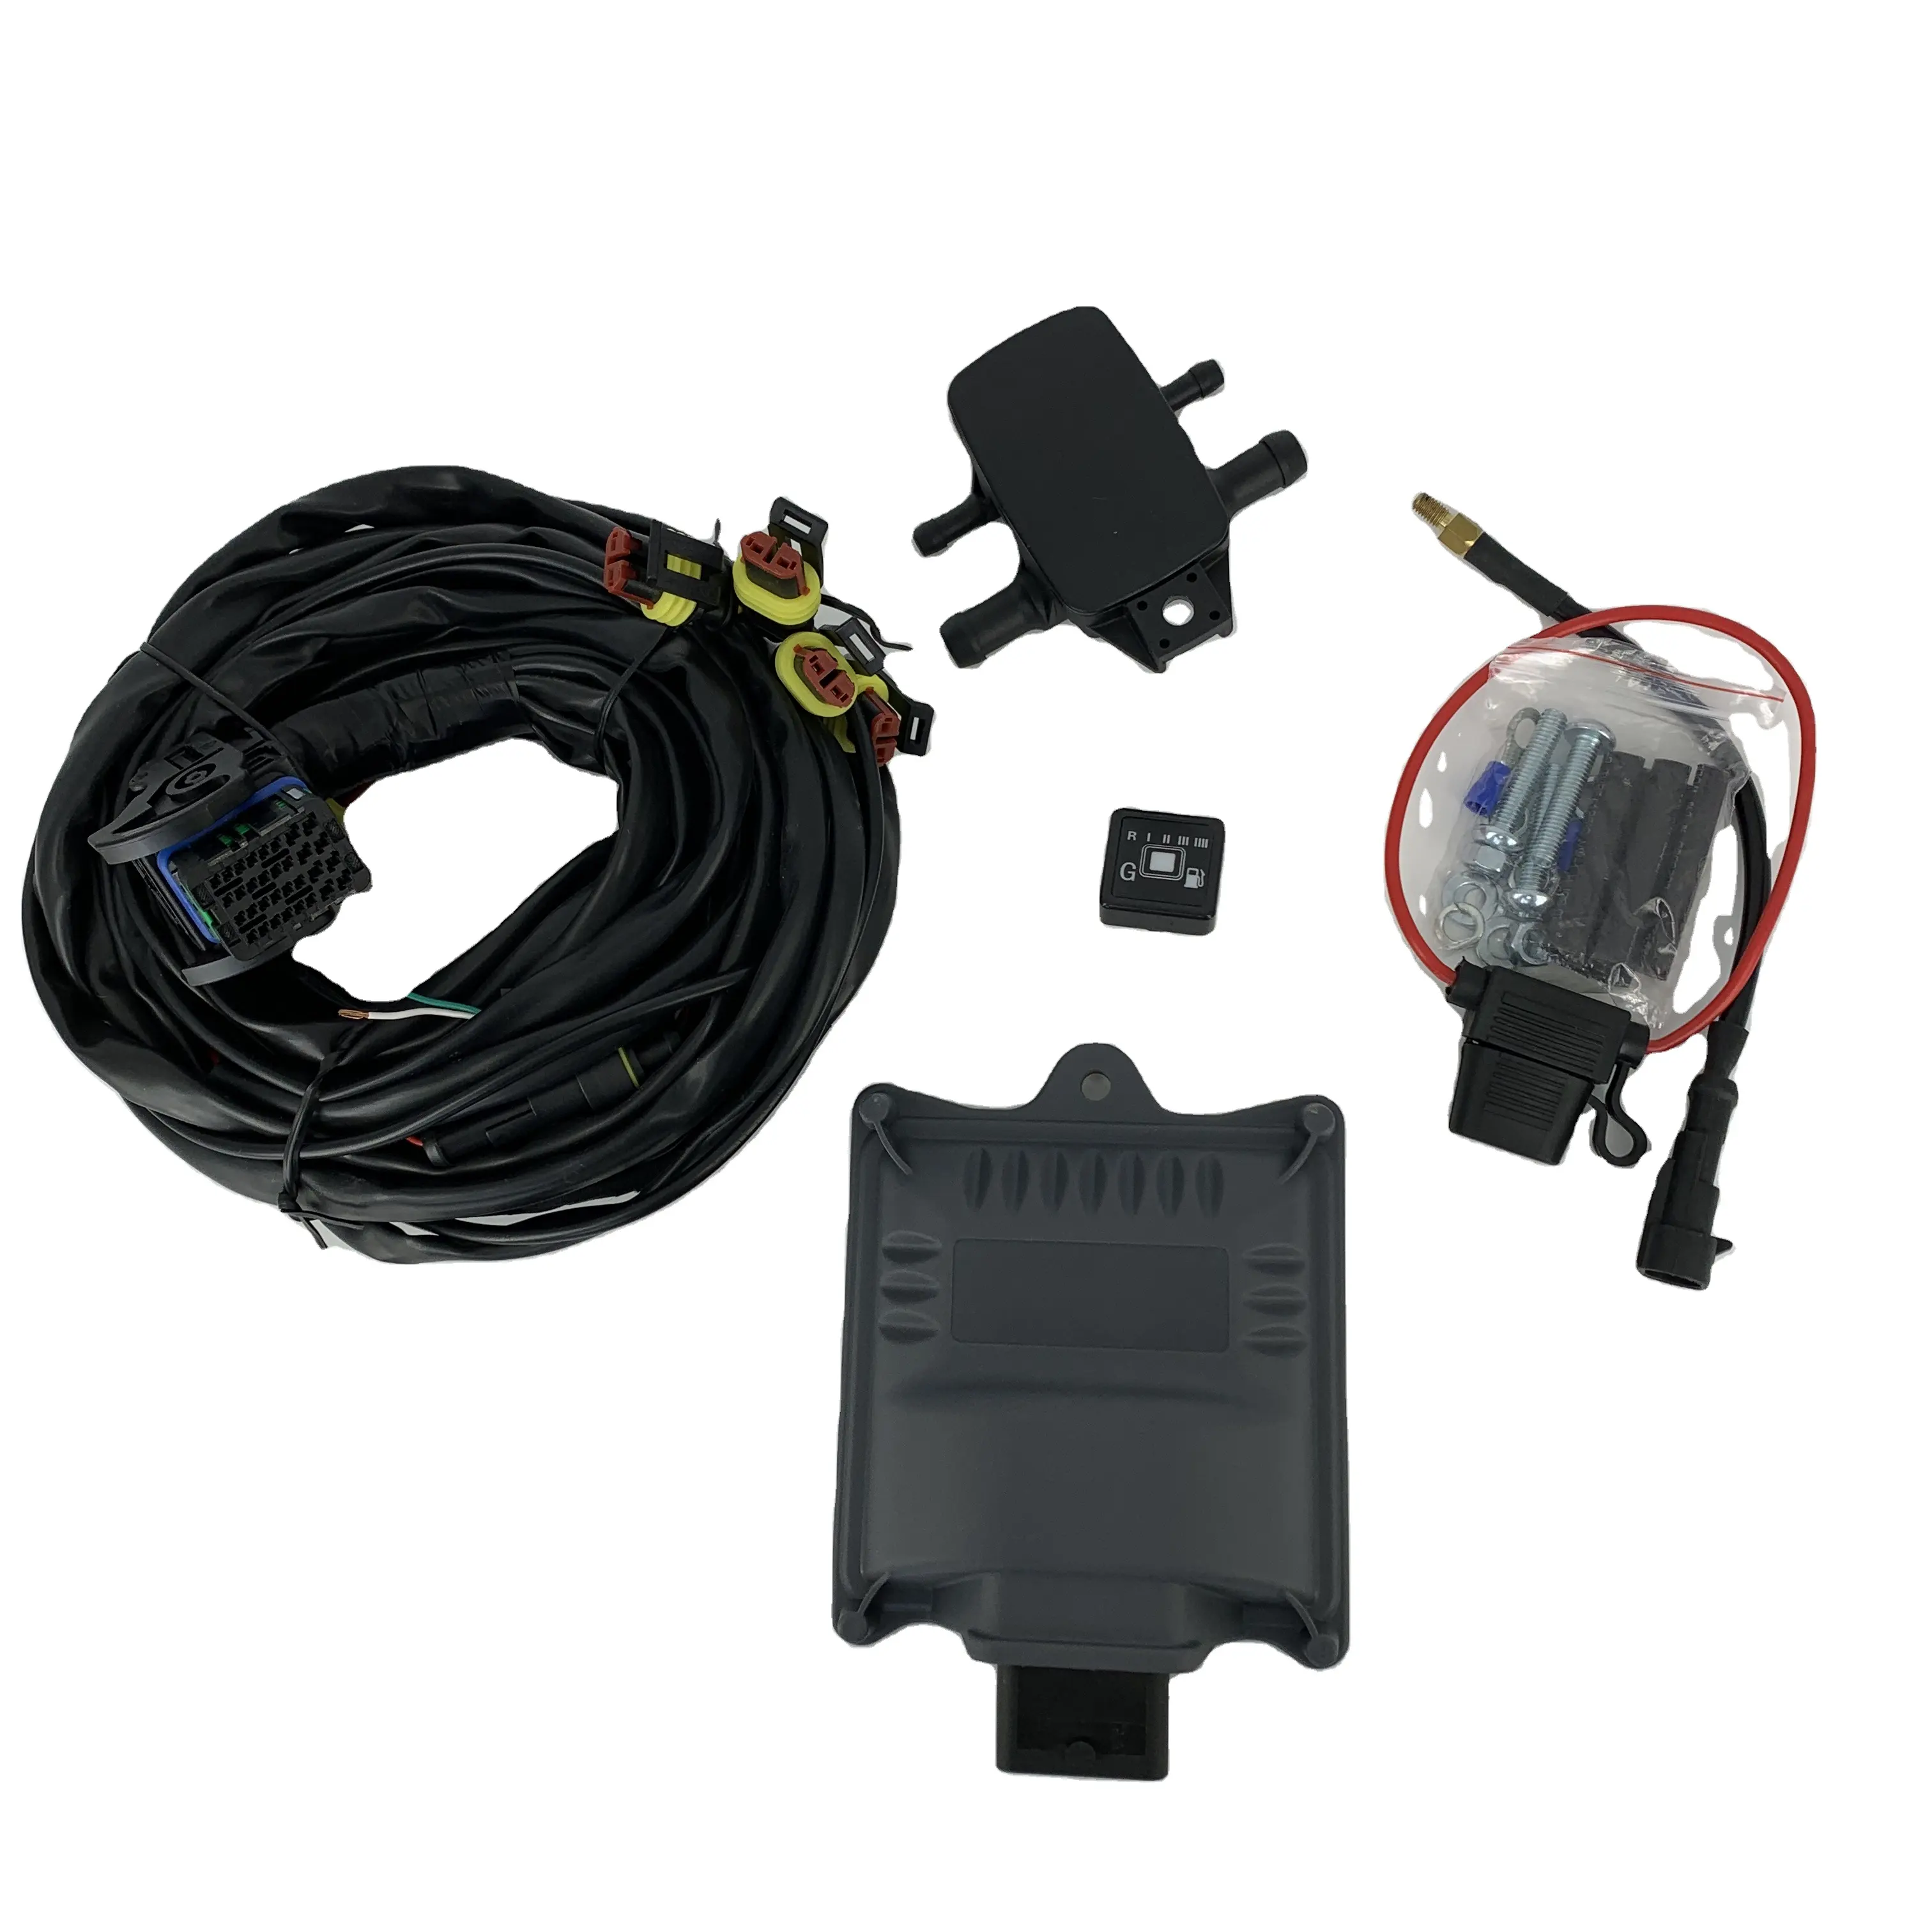 Sequential injection system 32 Pin CNG ECU for automatic calibration Kits